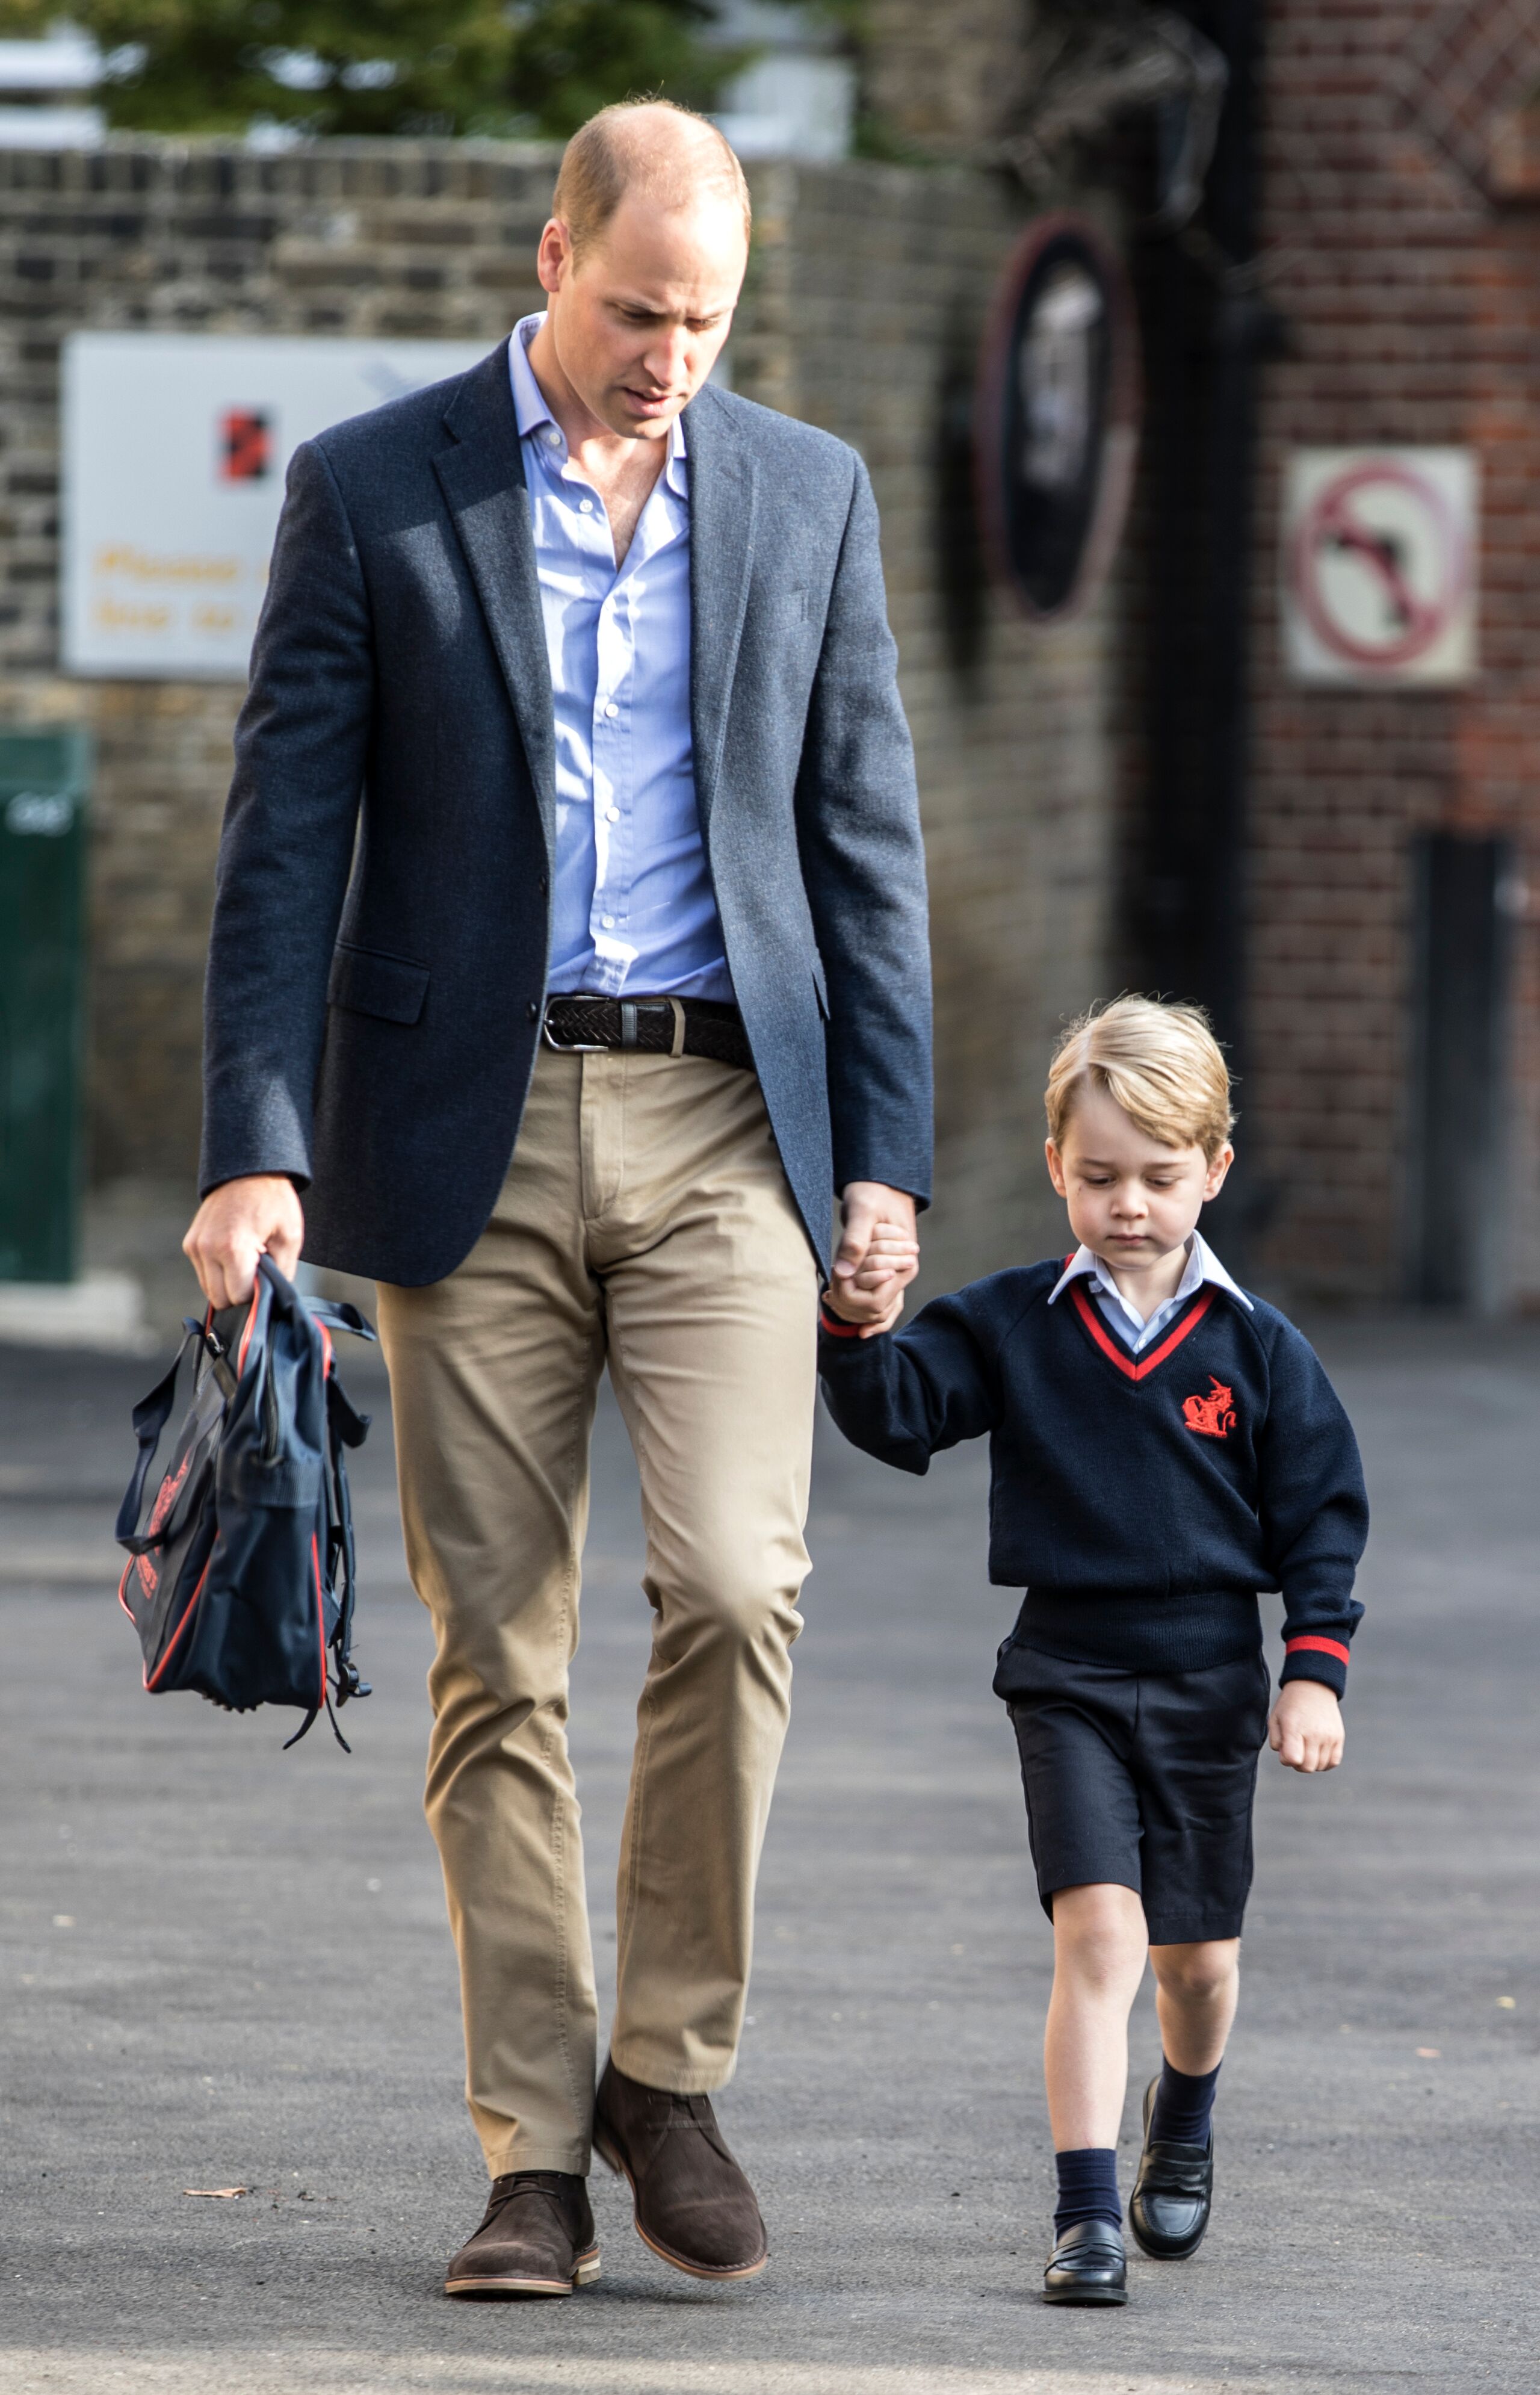 Prince George arrives for his first day of school at Thomas's Battersea with his father Prince William. | Source: Getty Images